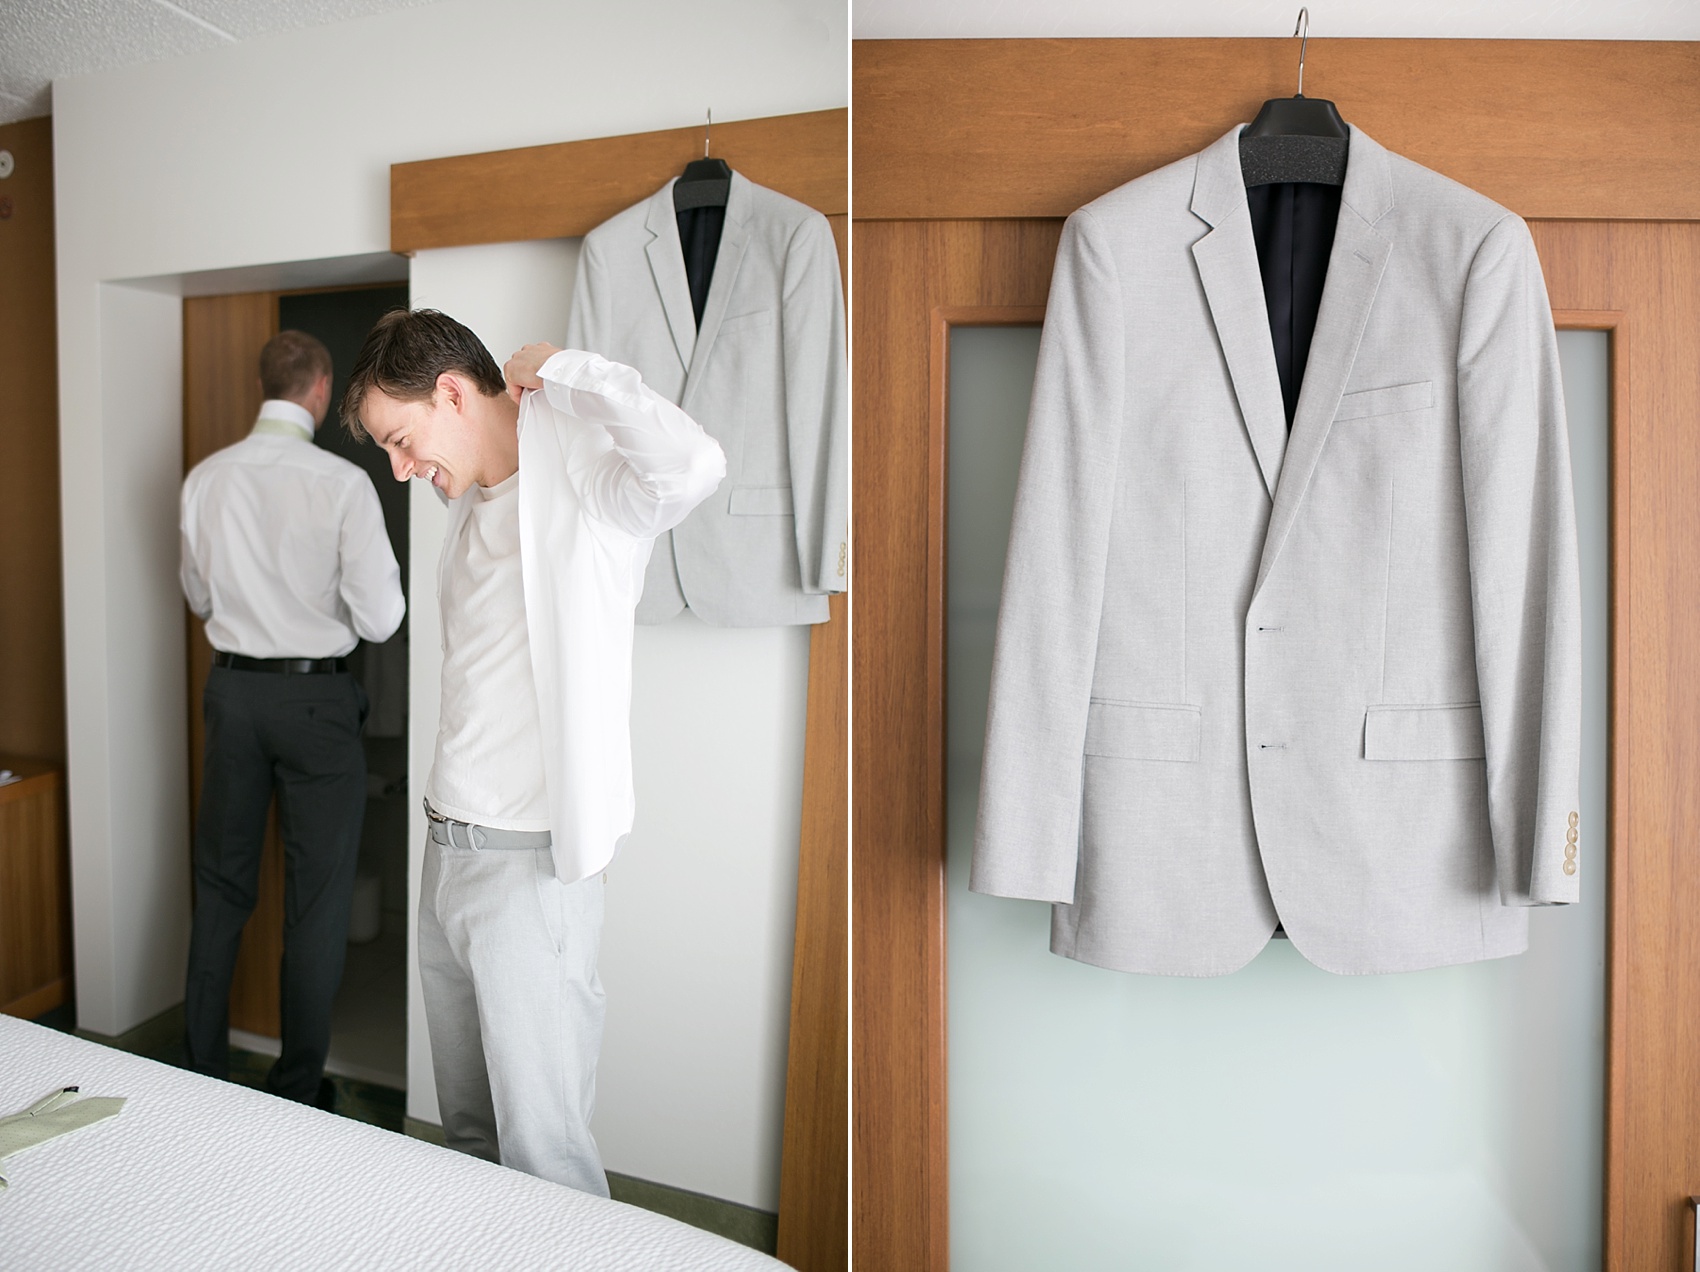 The groom prepares in his J. Crew suit for a summer vineyard wedding at Hopewell Valley Vineyards. Photos by New Jersey wedding photographer, Mikkel Paige Photography.